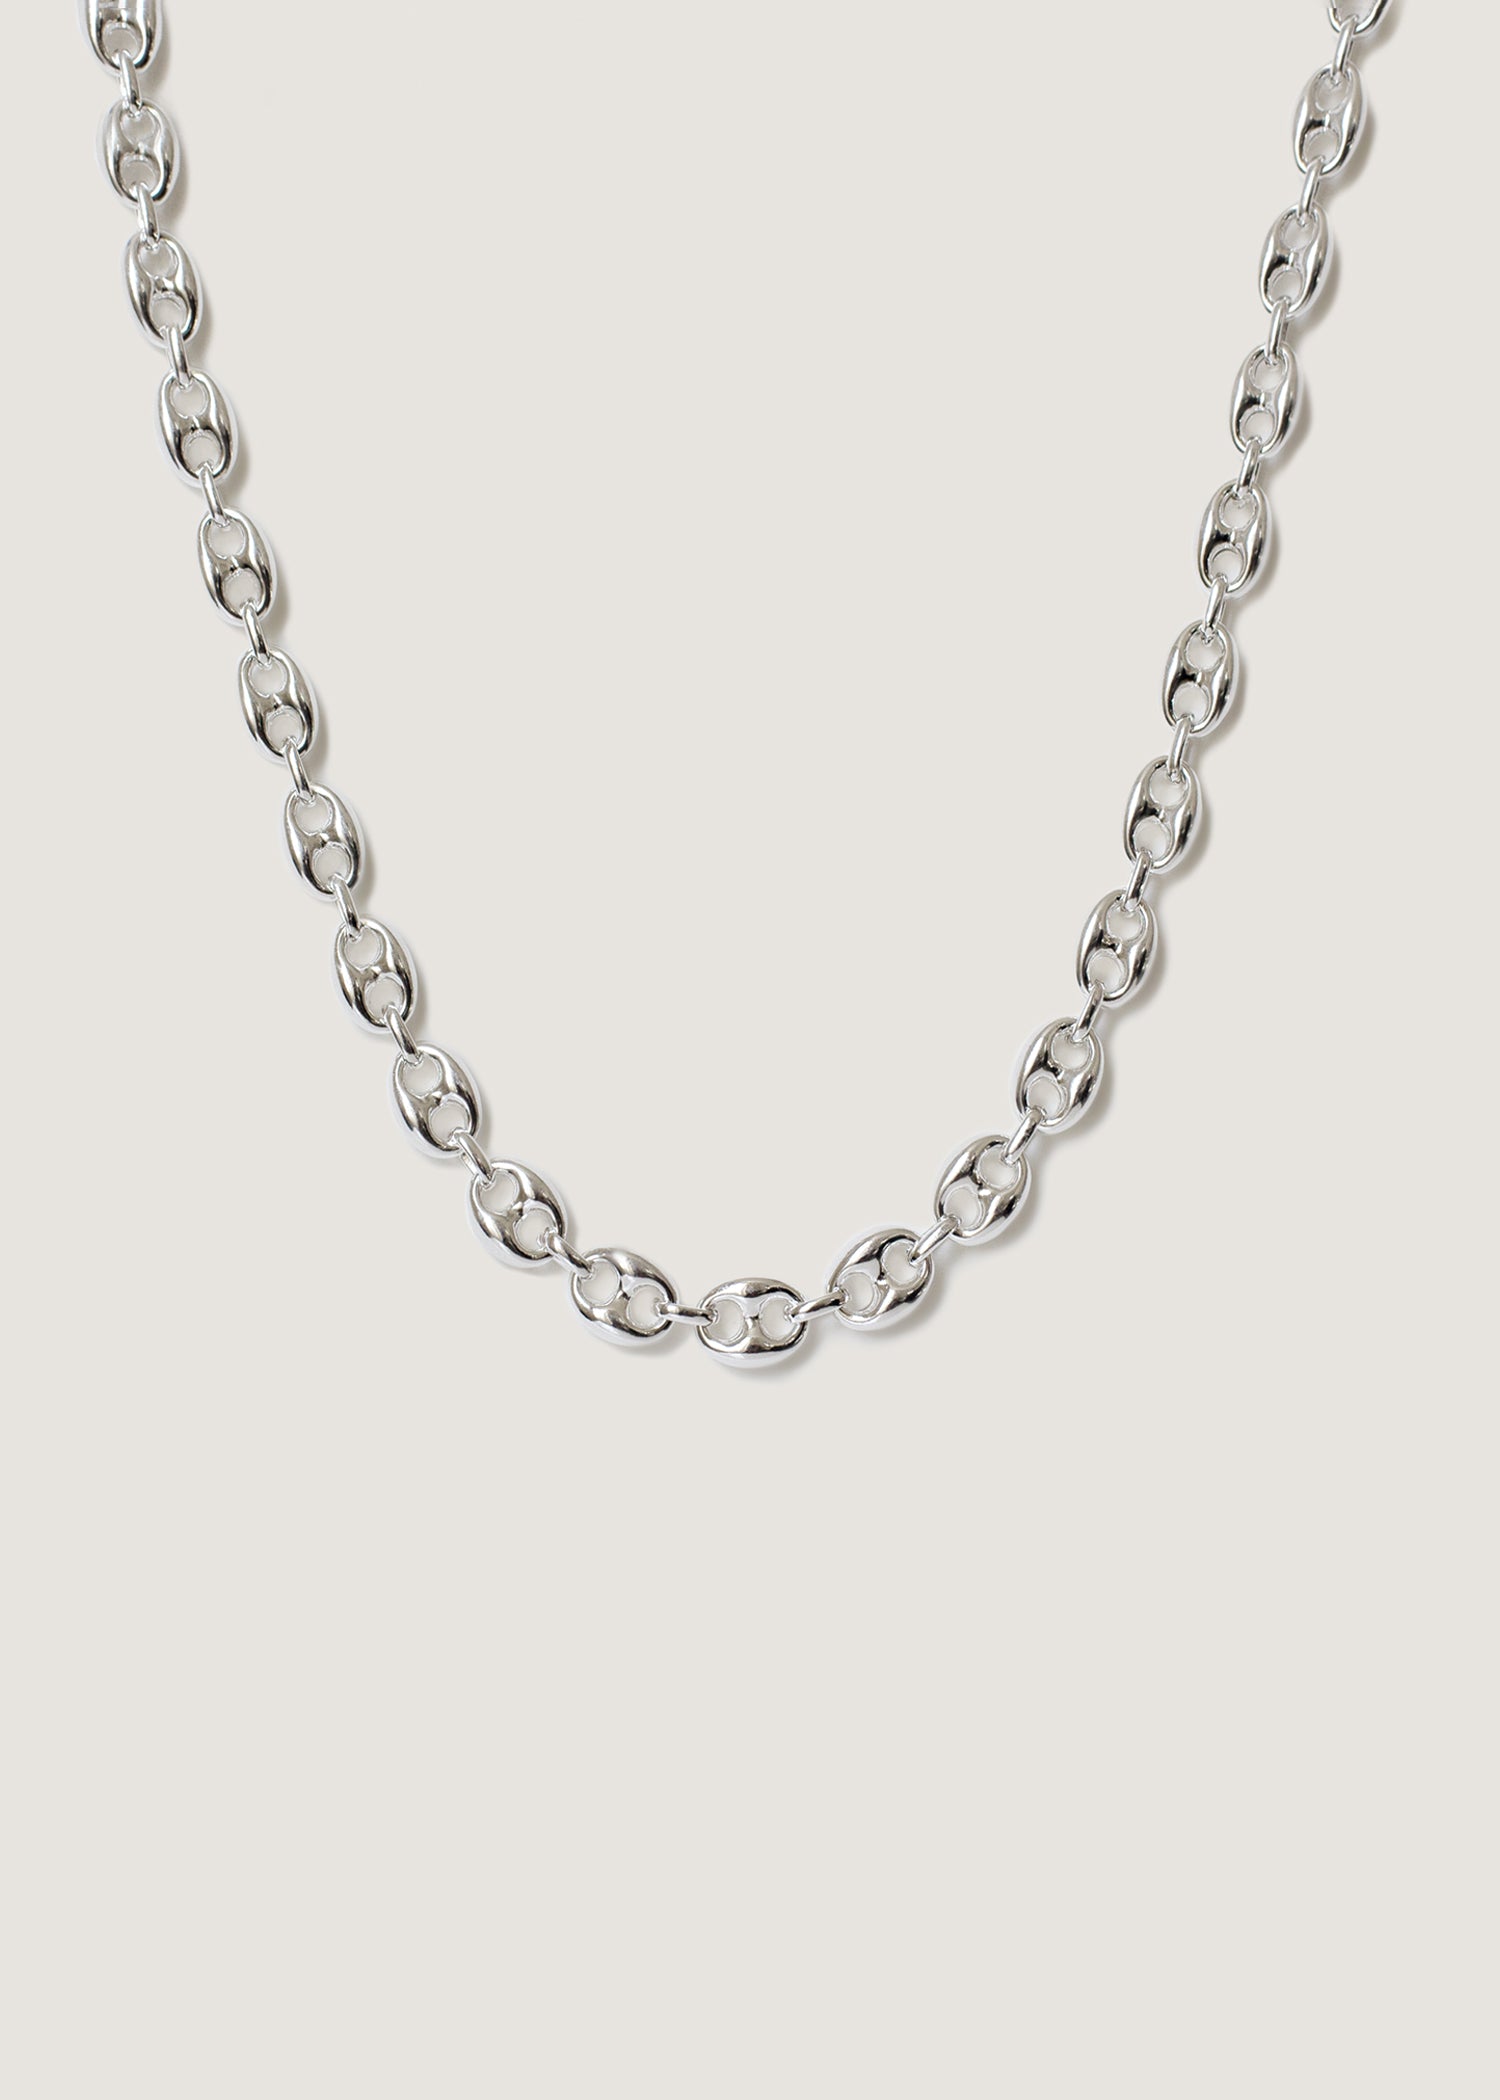 alt="Puffed Mariner Chain Necklace"